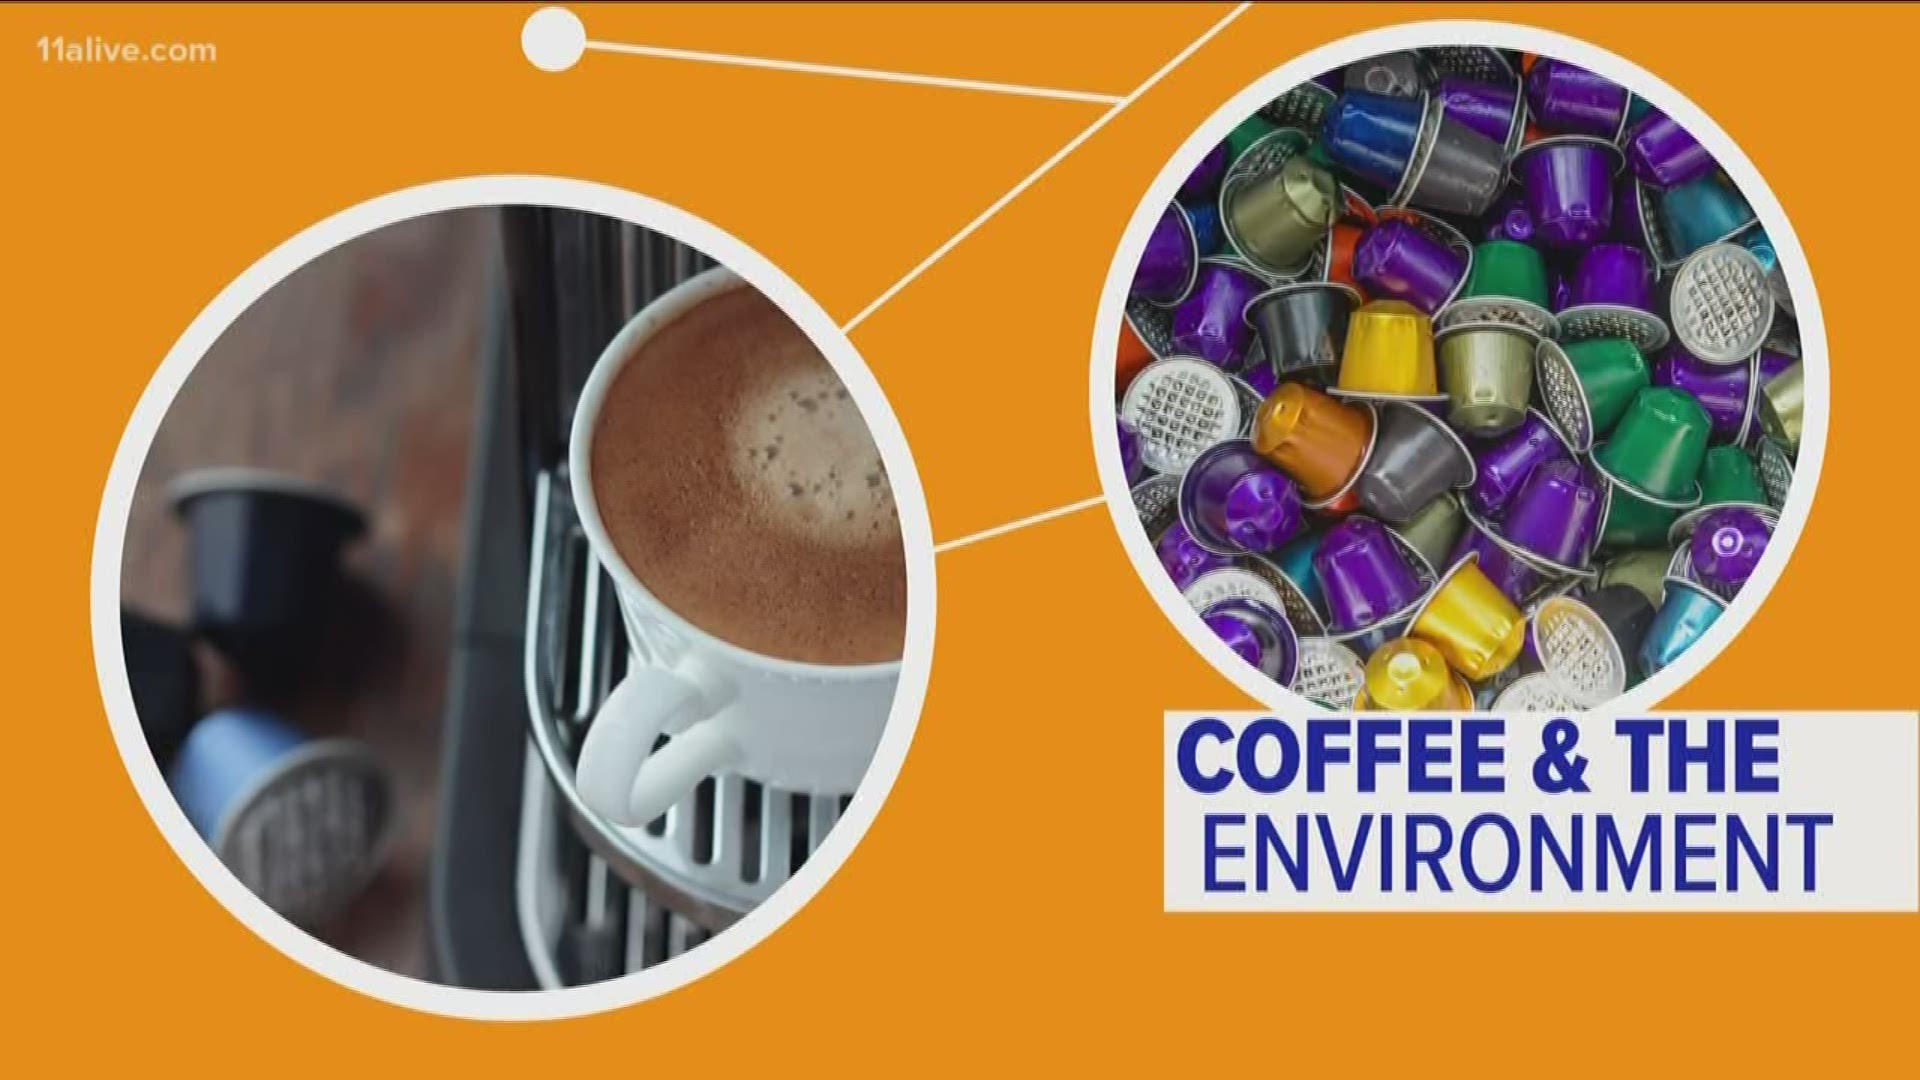 An explainer on how the popular coffee product contributes to pollution.